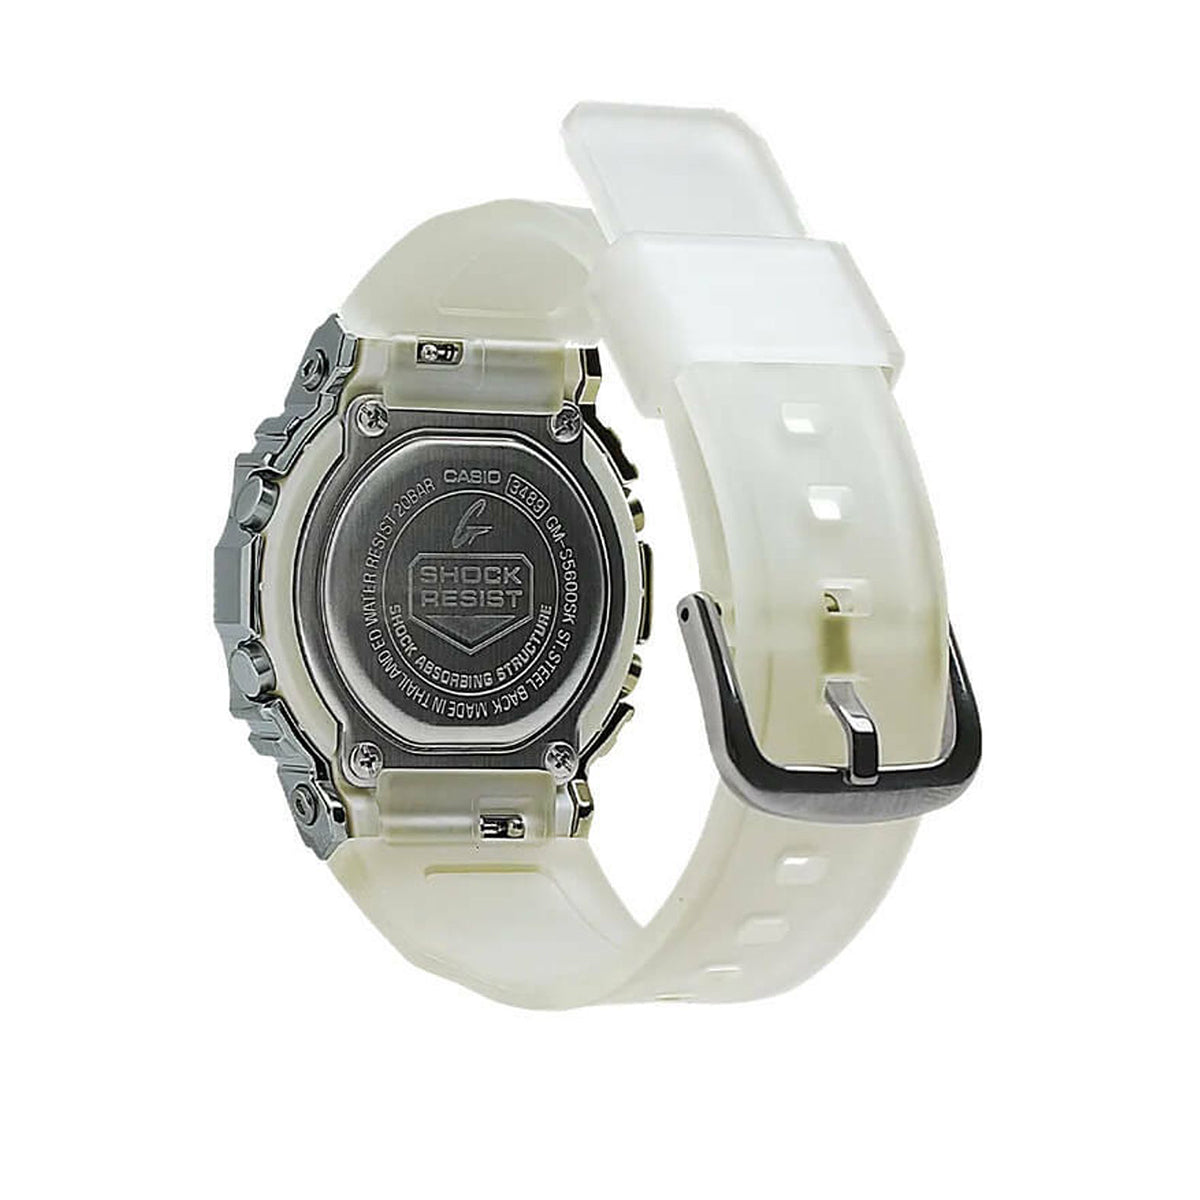 Casio - G-Shock - GM-S5600SK-7DR